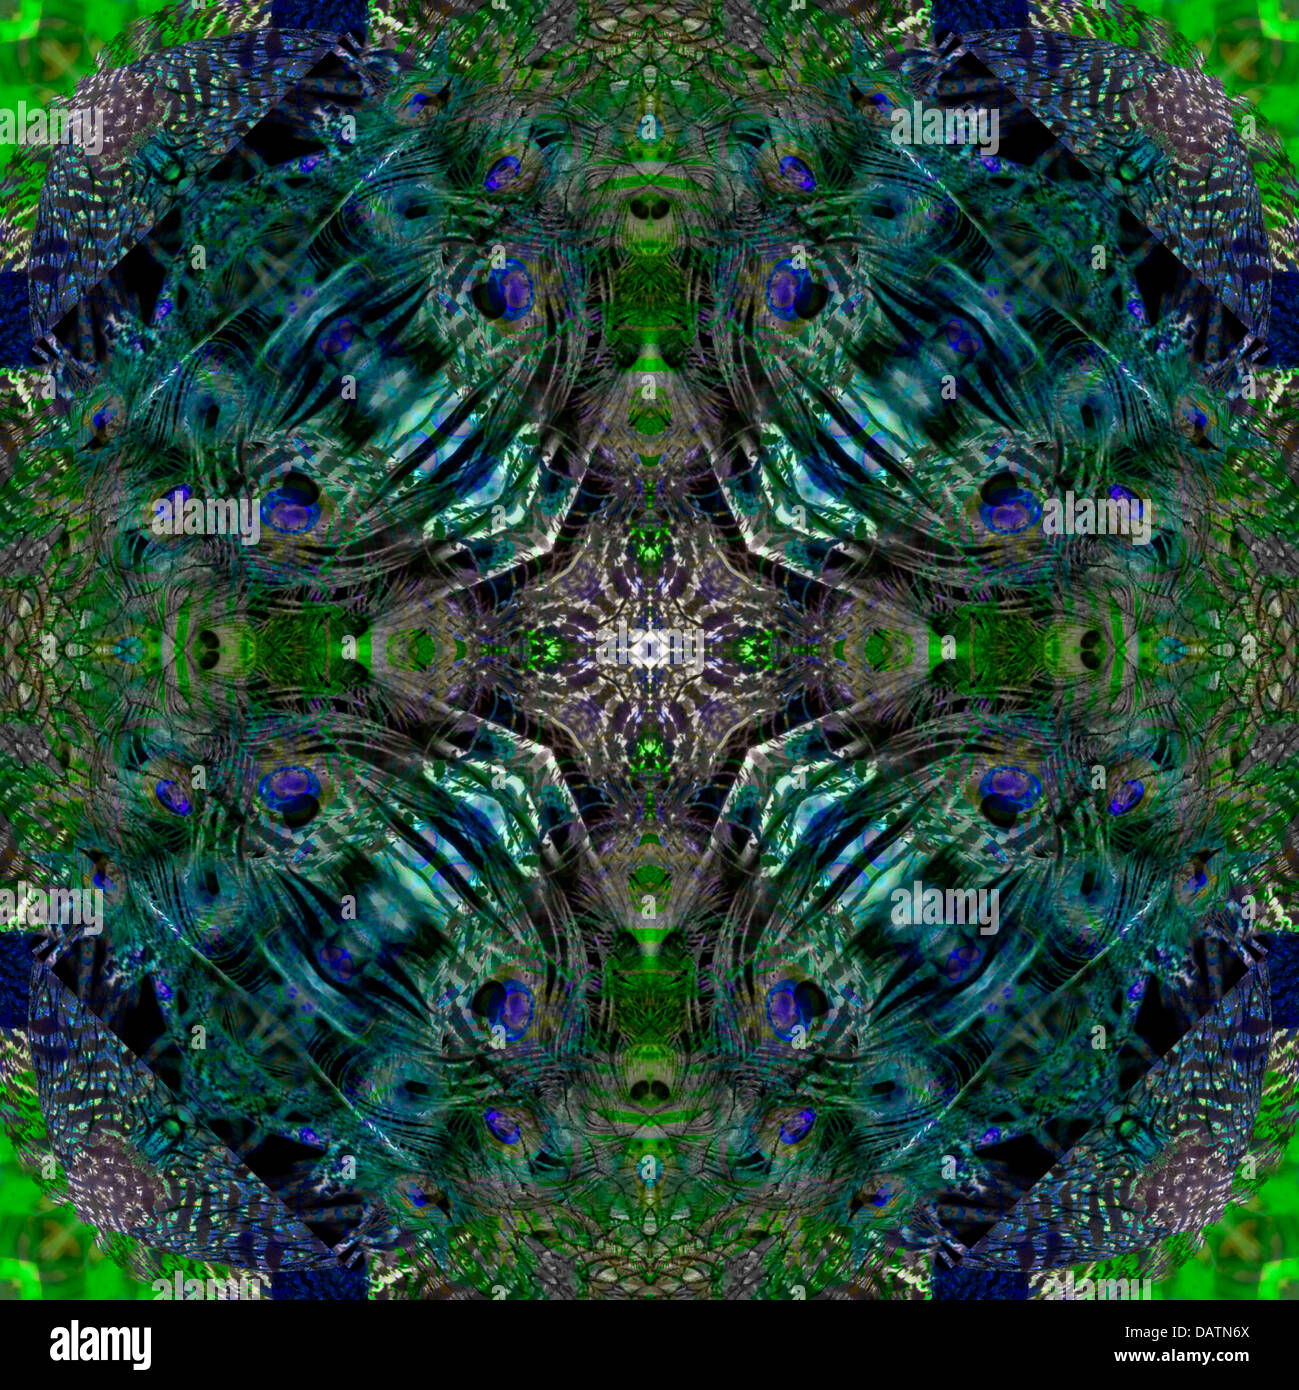 Digitally manipulated abstract square image of a peacock.which results in a stunning symmetrical kaleidoscope of blue and greens Stock Photo